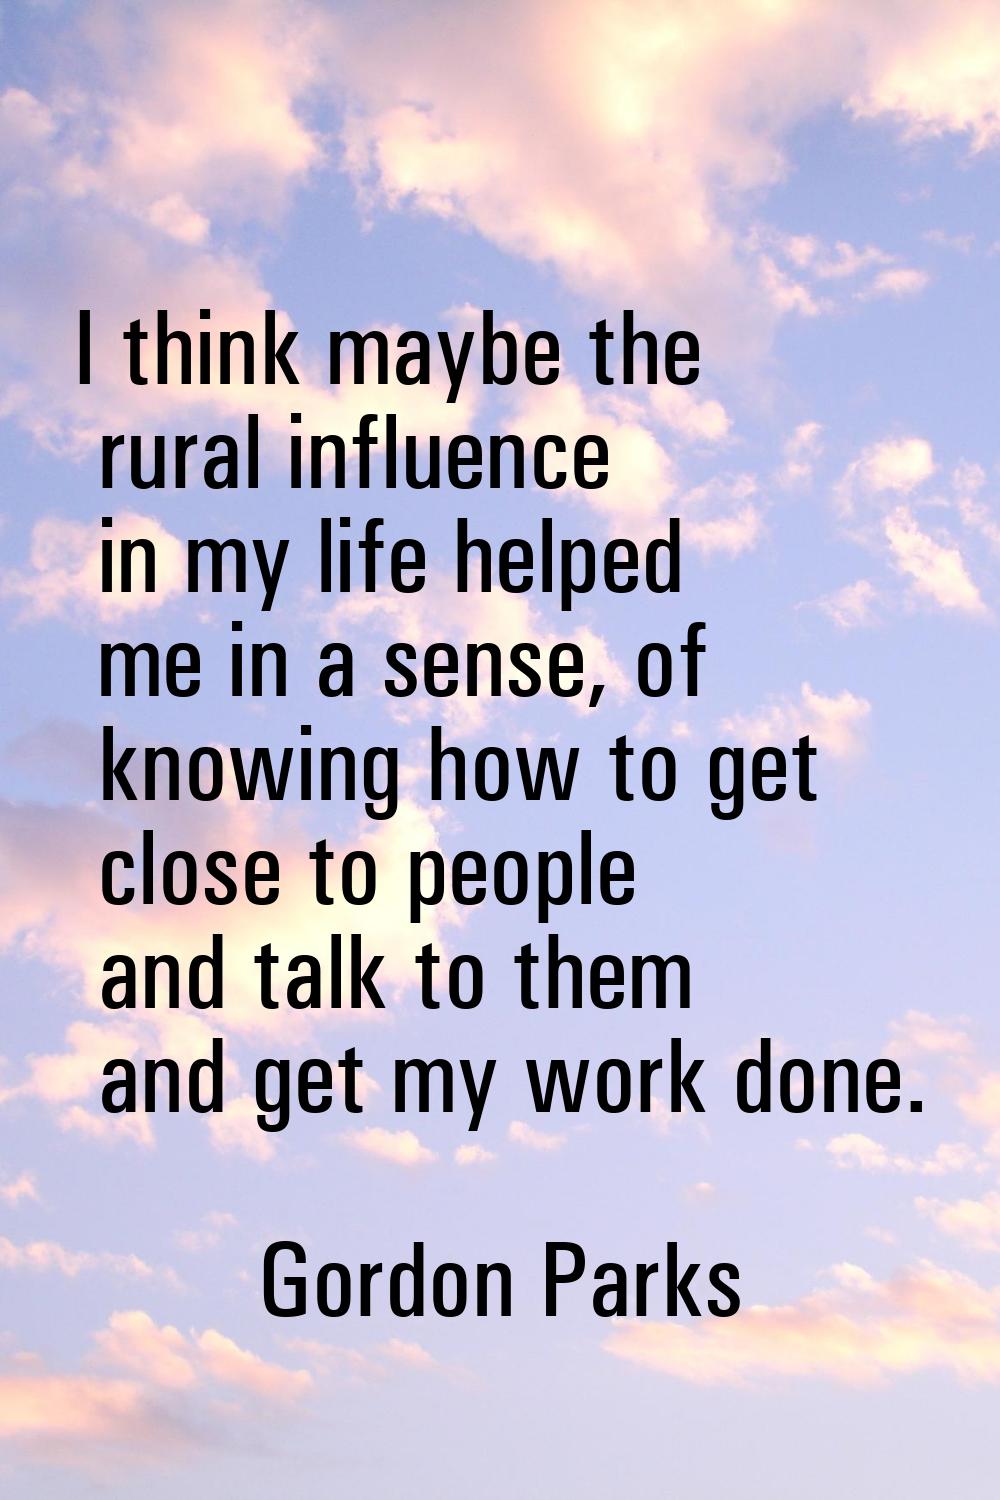 I think maybe the rural influence in my life helped me in a sense, of knowing how to get close to p